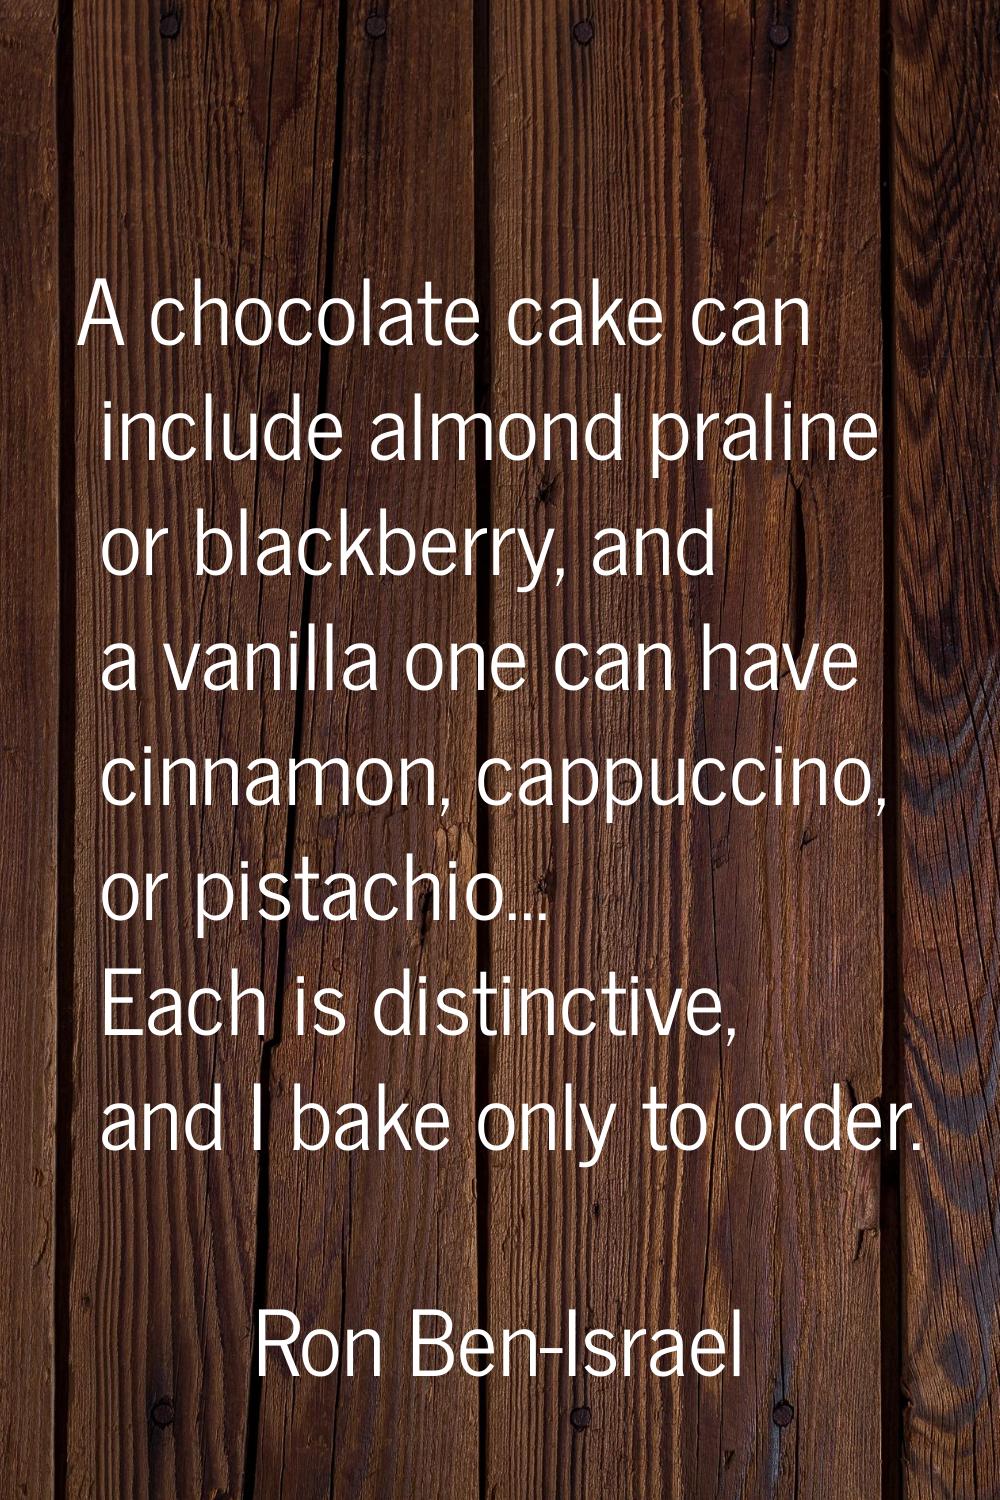 A chocolate cake can include almond praline or blackberry, and a vanilla one can have cinnamon, cap